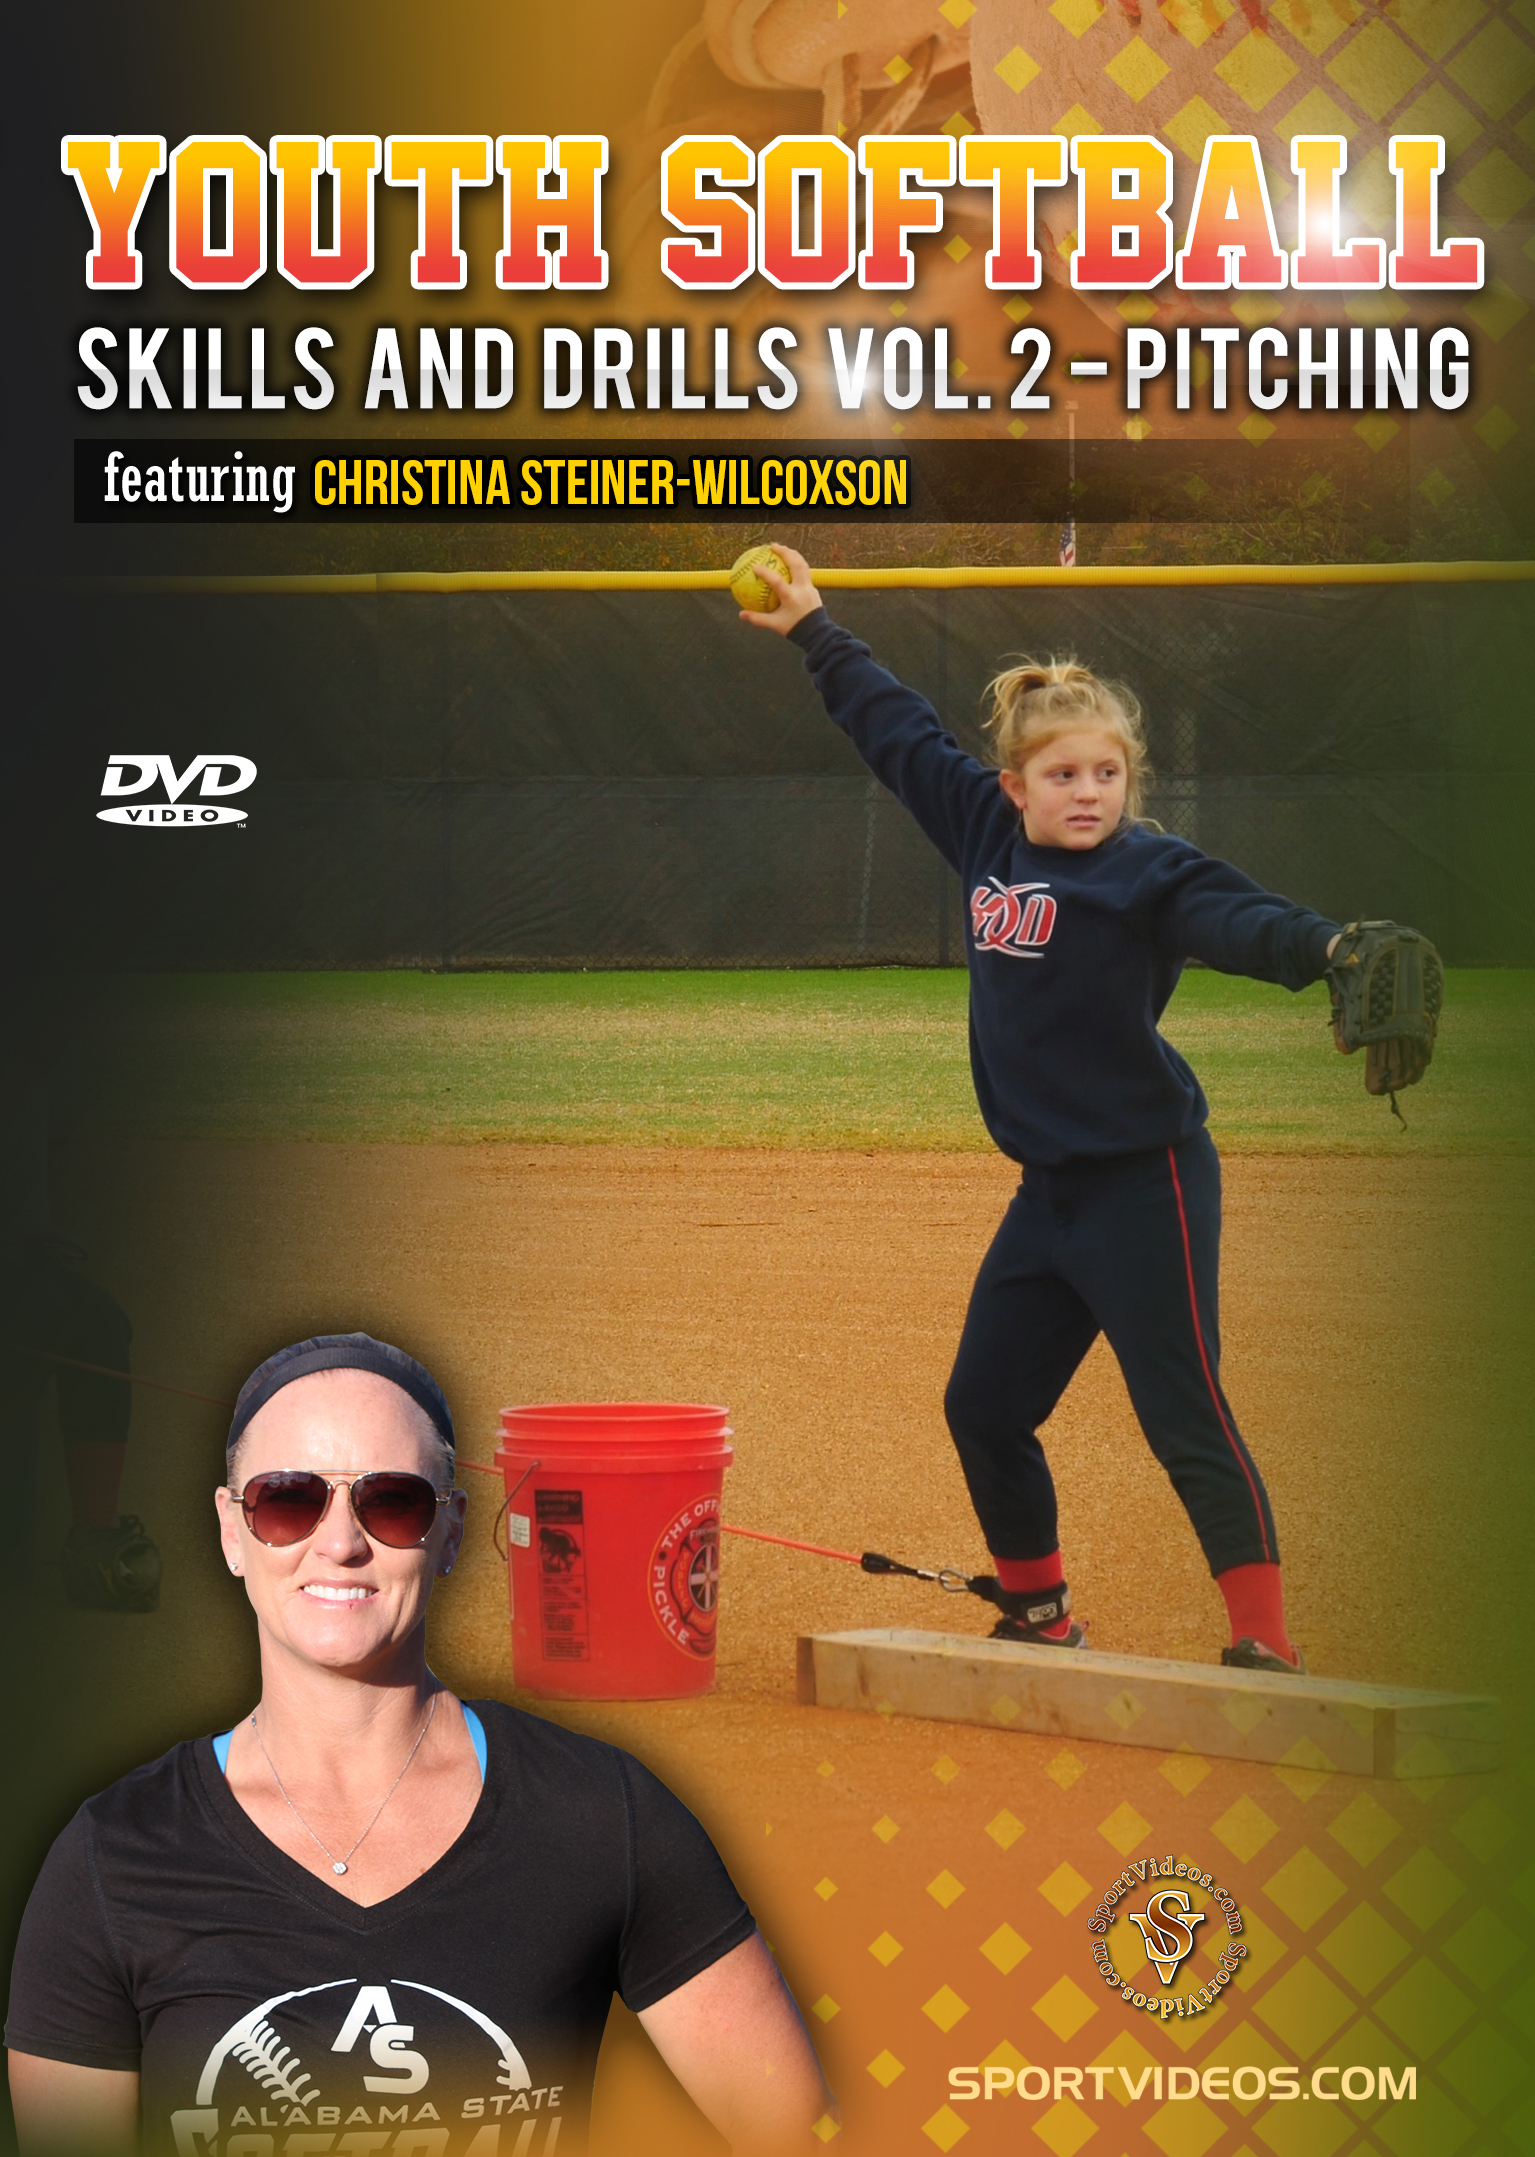 Youth Softball Skills and Drills Vol. 2 - Pitching Download 